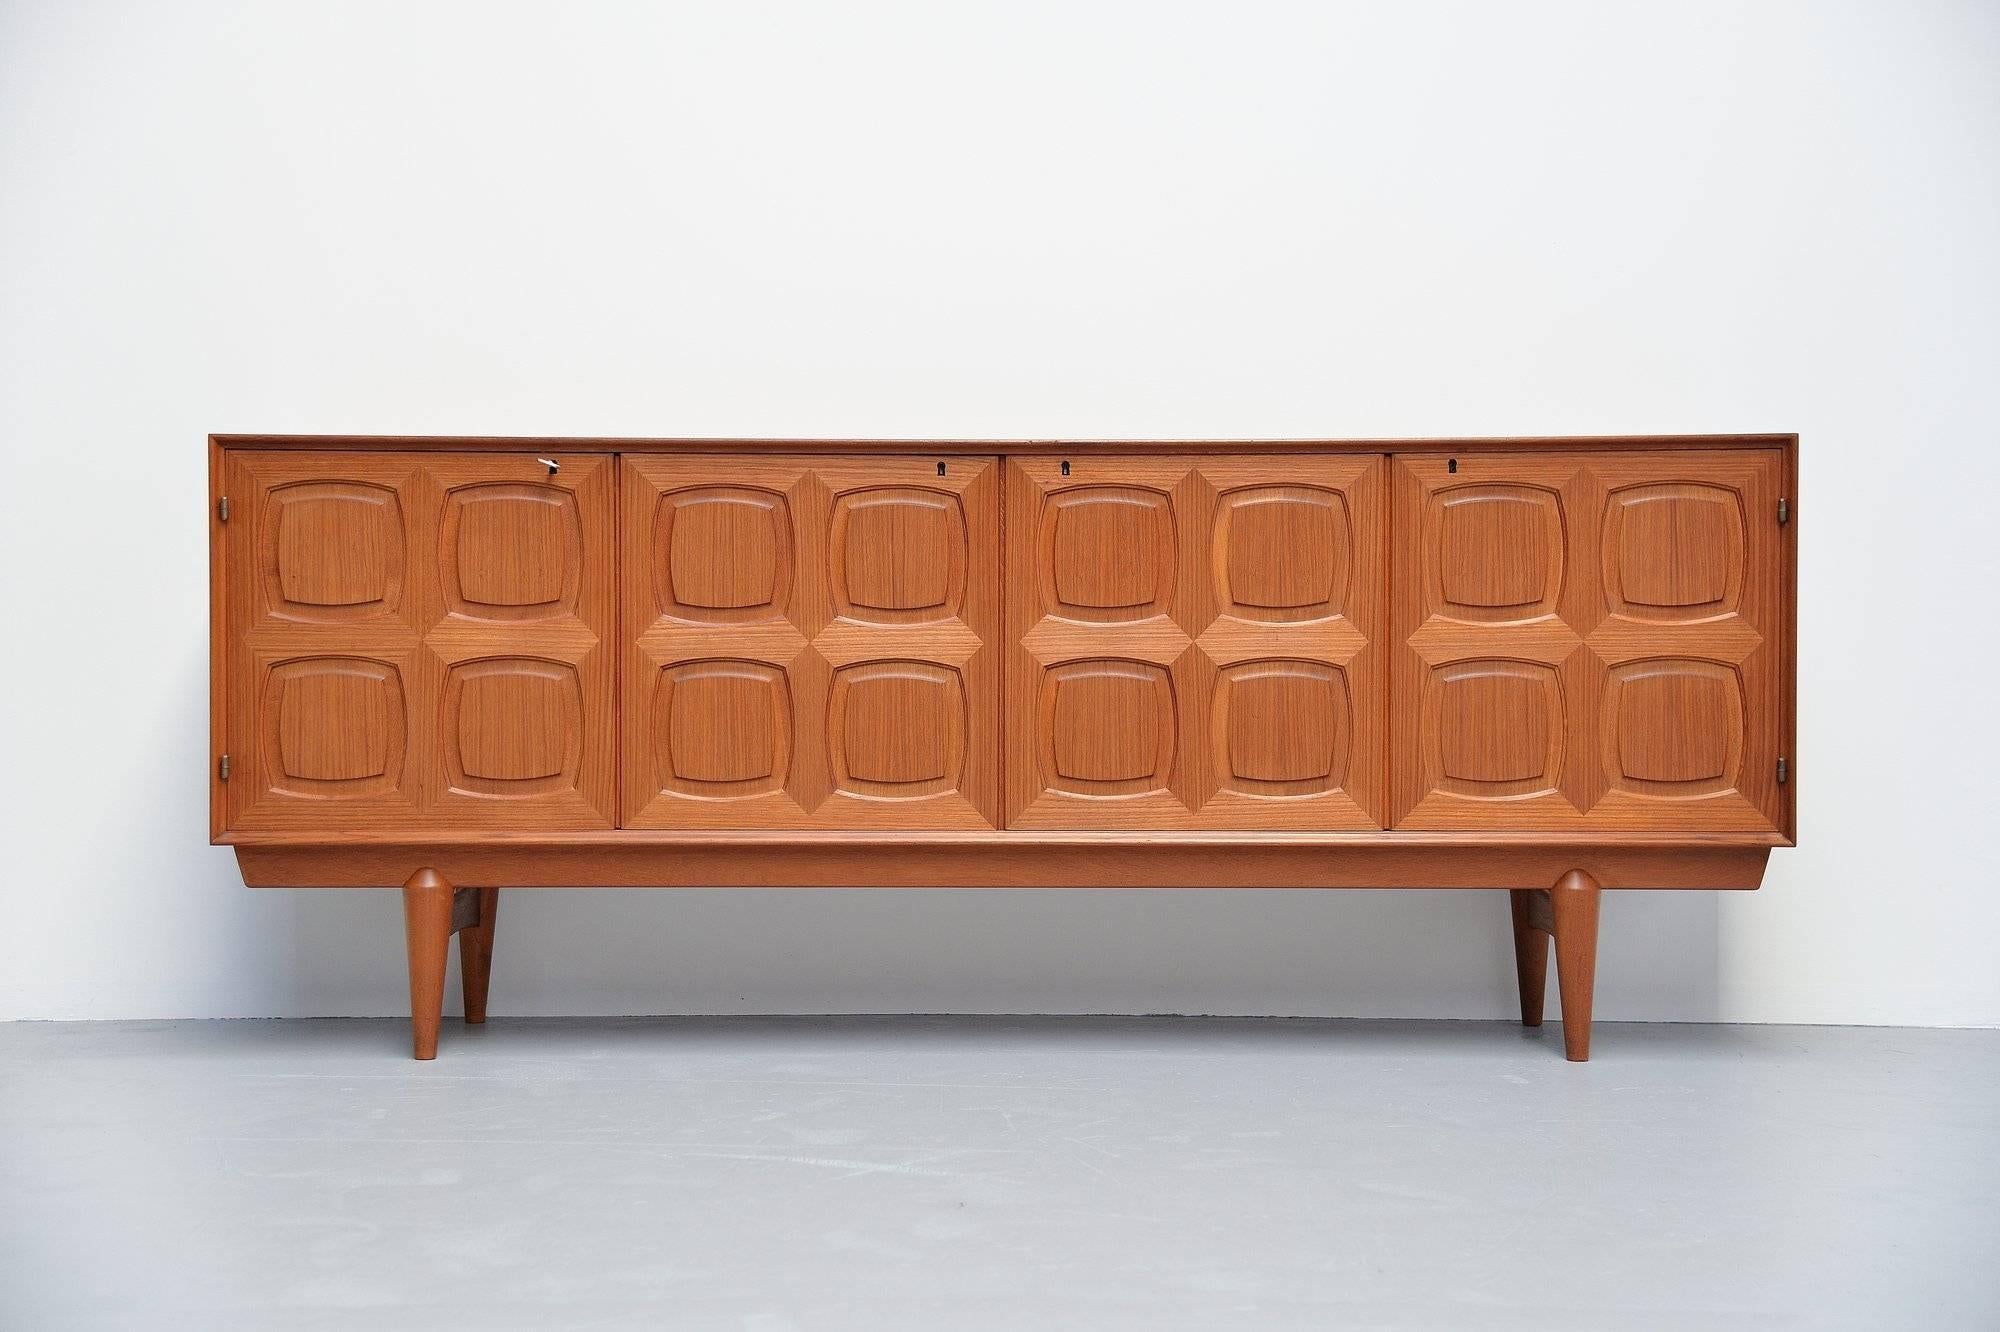 Nice graphic sideboard designed by Rastad & Relling and manufactured by Gustav Bahus, Denmark, 1960. The sideboard is made of teak wood and has very nice graphic panel doors. Four Doors with shelves behind and sliding shelves behind the right door.